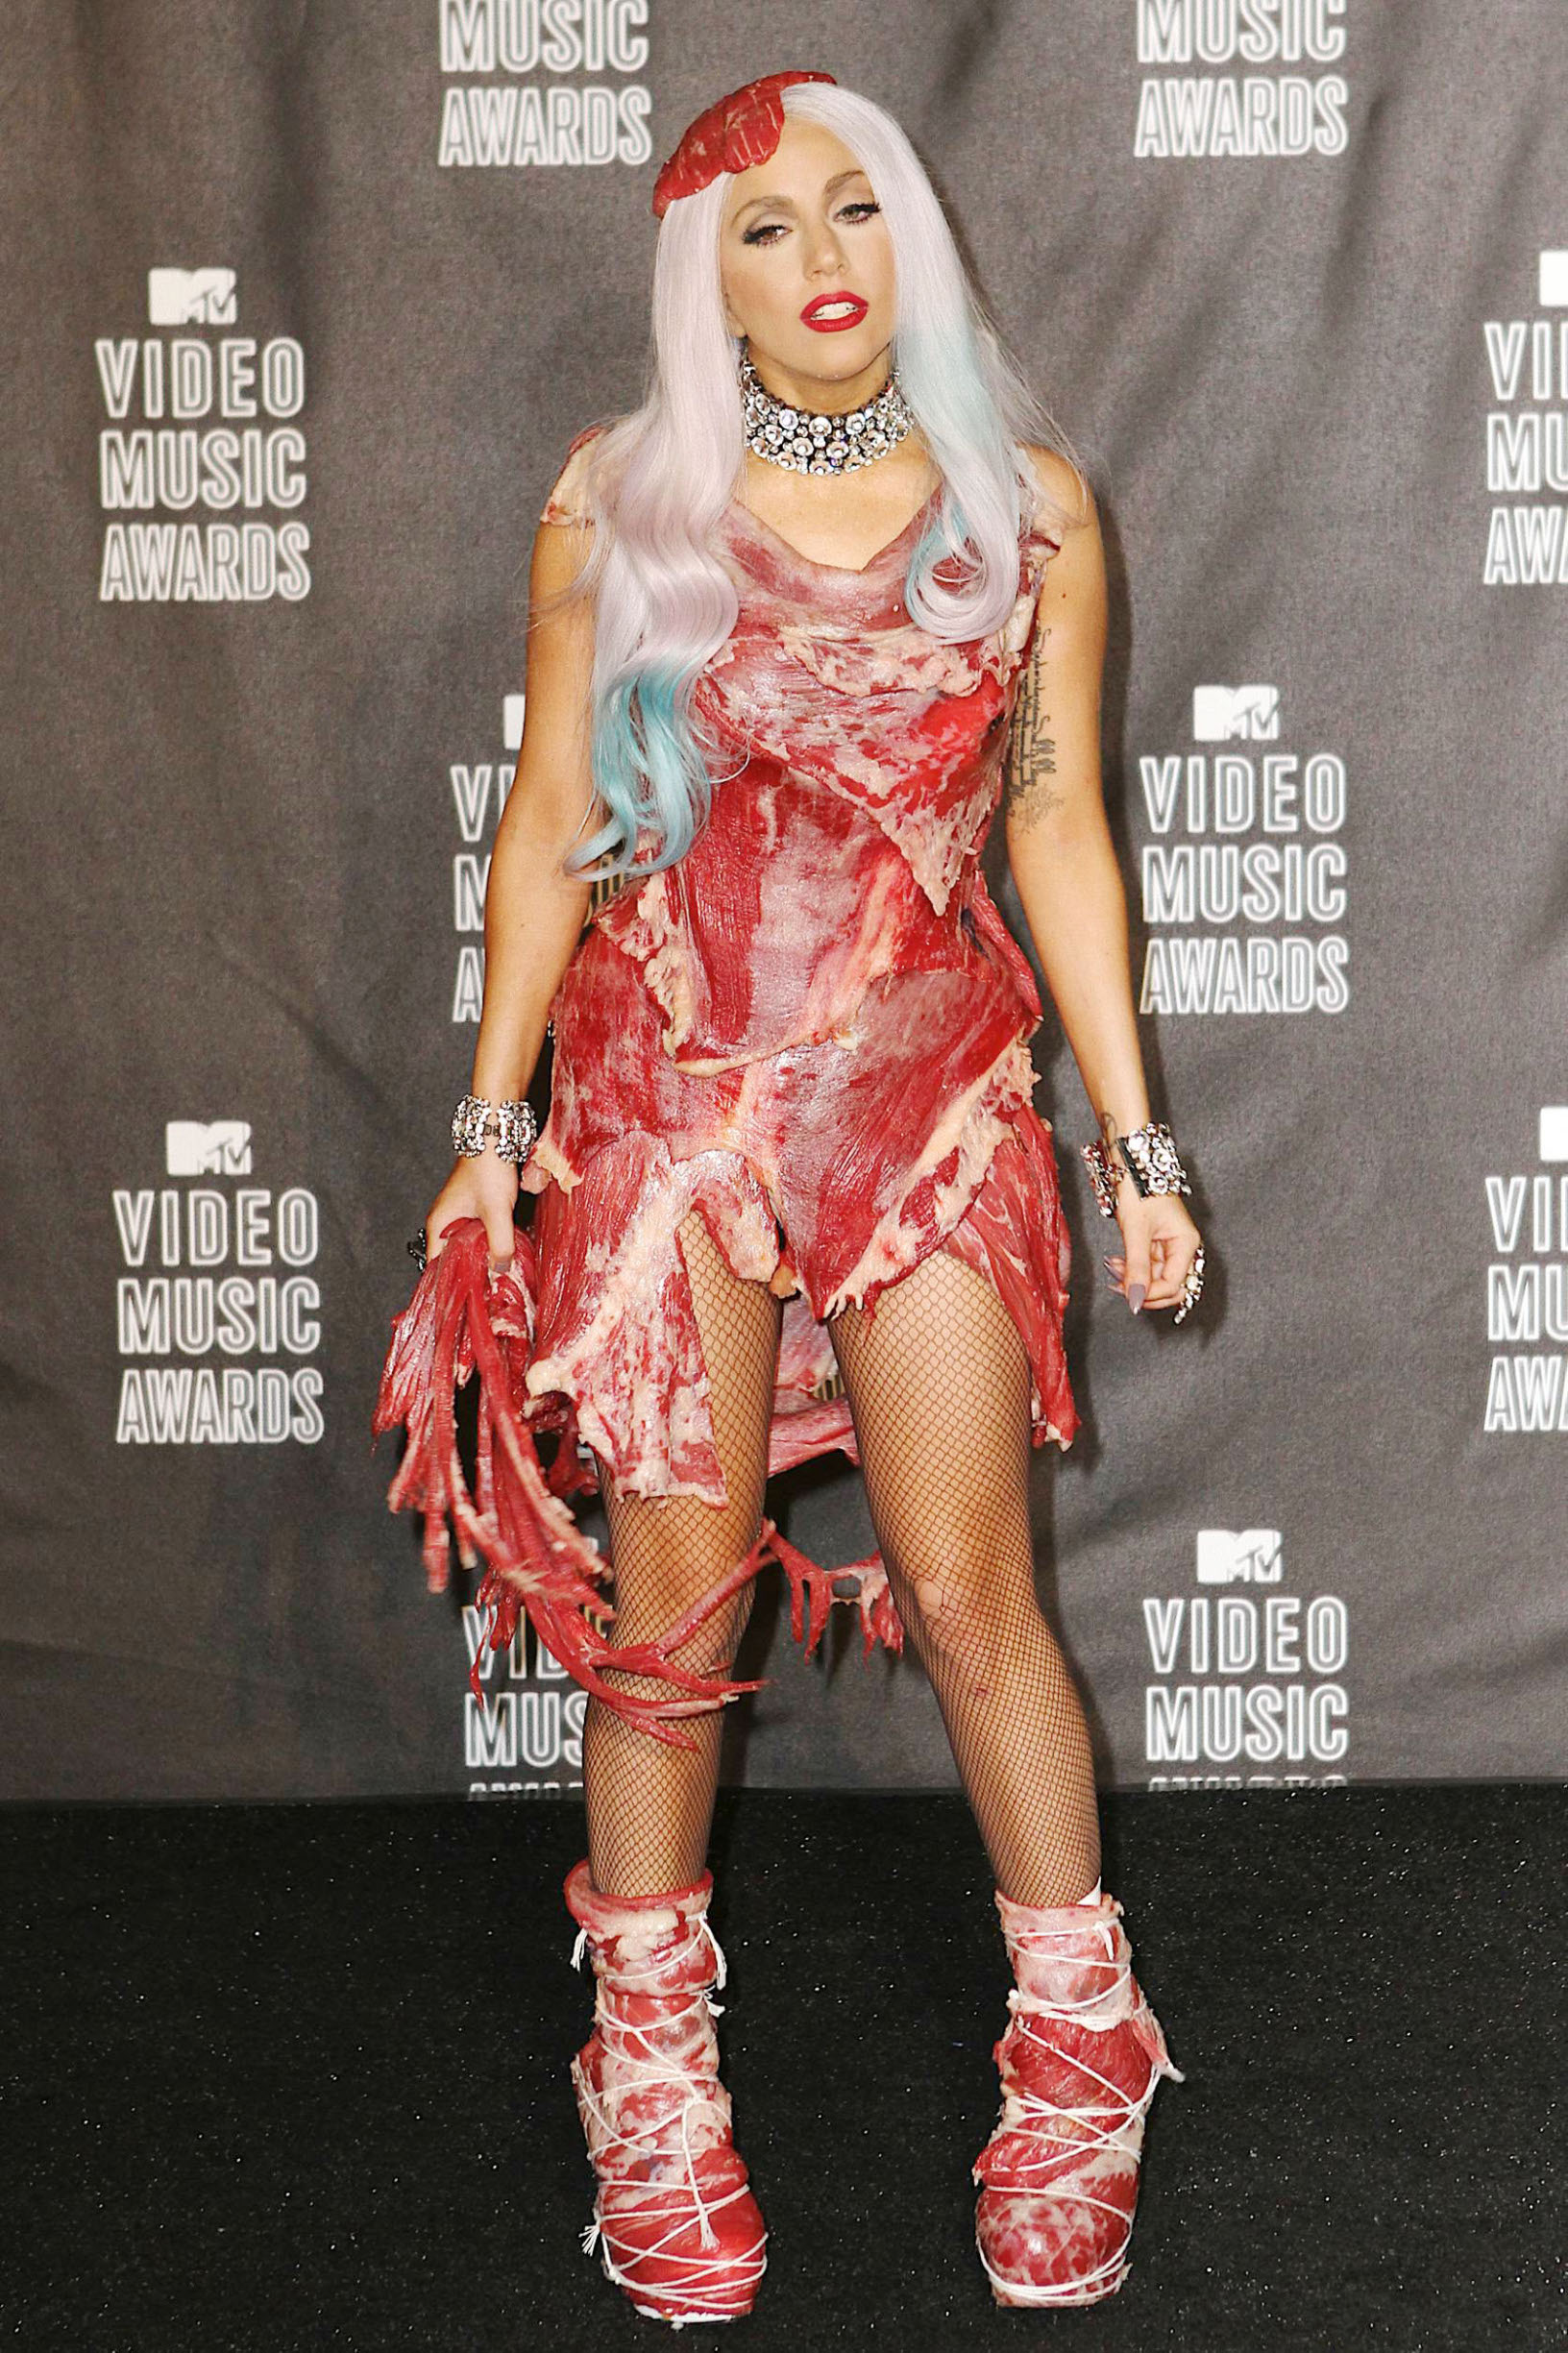 Lady Gaga adorned in her meat dress, boots and hat, backstage in the pressroom after the 2010 MTV Video Music Awards held at the Nokia Theatre.  Top prizes went to pop singer Gaga and teen sensation Justin Bieber. Los Angeles, CA.  09/12/10., Image: 79026042, License: Rights-managed, Restrictions: MAVRIXONLINE.COM 305 542 9275 or 954 698 6777.
Fees must be agreed for image use. Daily Mail Online Out.
Byline, credit, TV usage, web usage or linkback must read MAVRIXONLINE.COM.
Failure to byline correctly will incur double the agreed fee., Model Release: no, Credit line: laj / Mavrixphoto / Profimedia